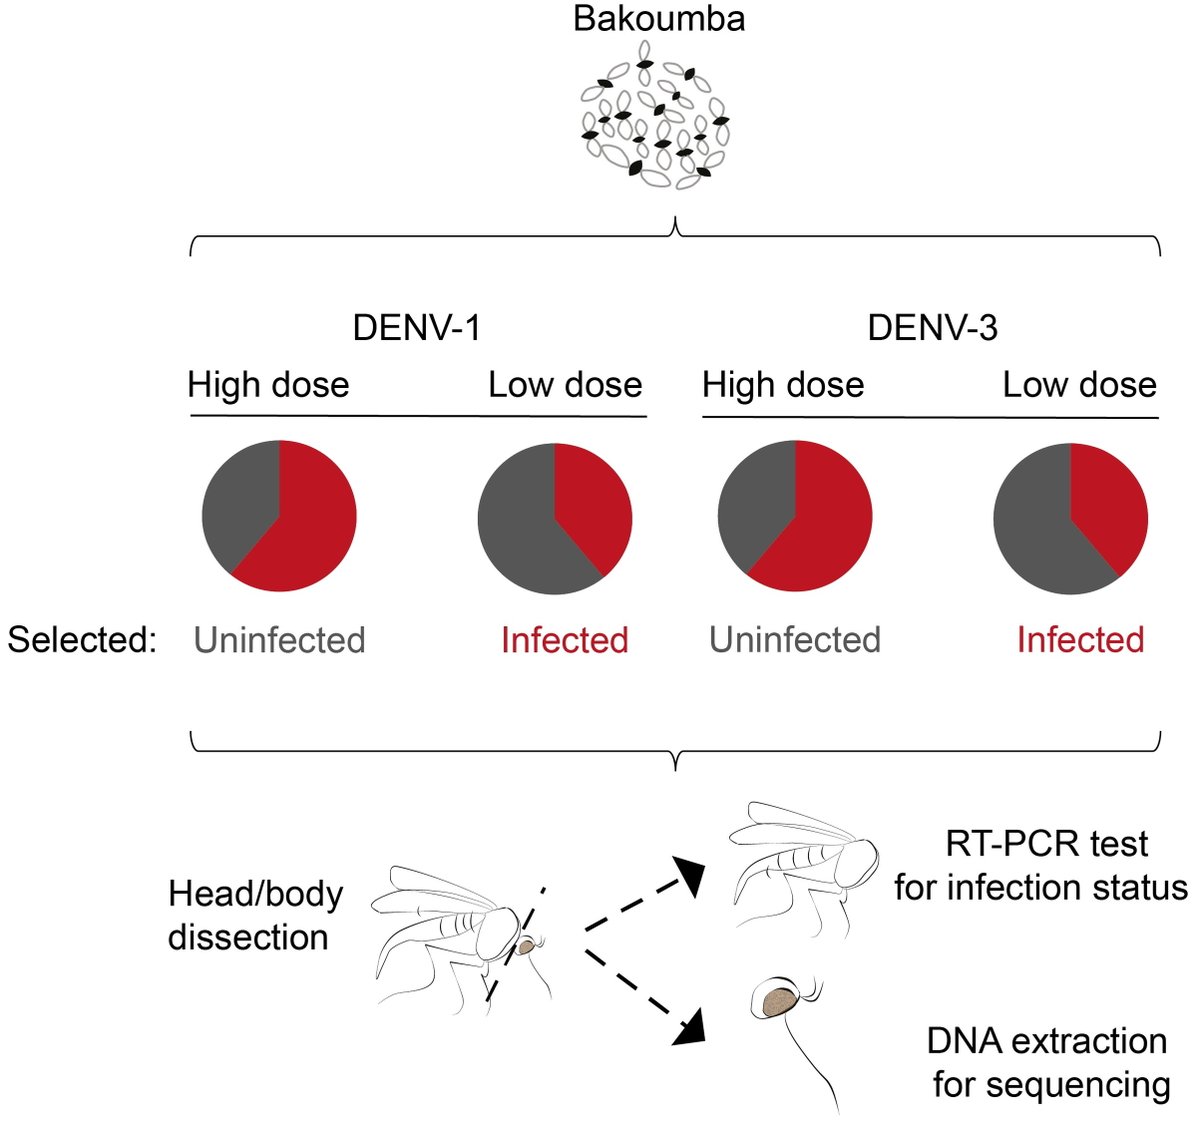 We compared the genetic basis of Bakoumba resistance to DENV-1 and DENV-3 by detecting allele frequency differences between replicate pools of individuals with contrasted phenotypes (resistant = uninfected at a high virus dose vs. susceptible = infected at a low virus dose). 4/7